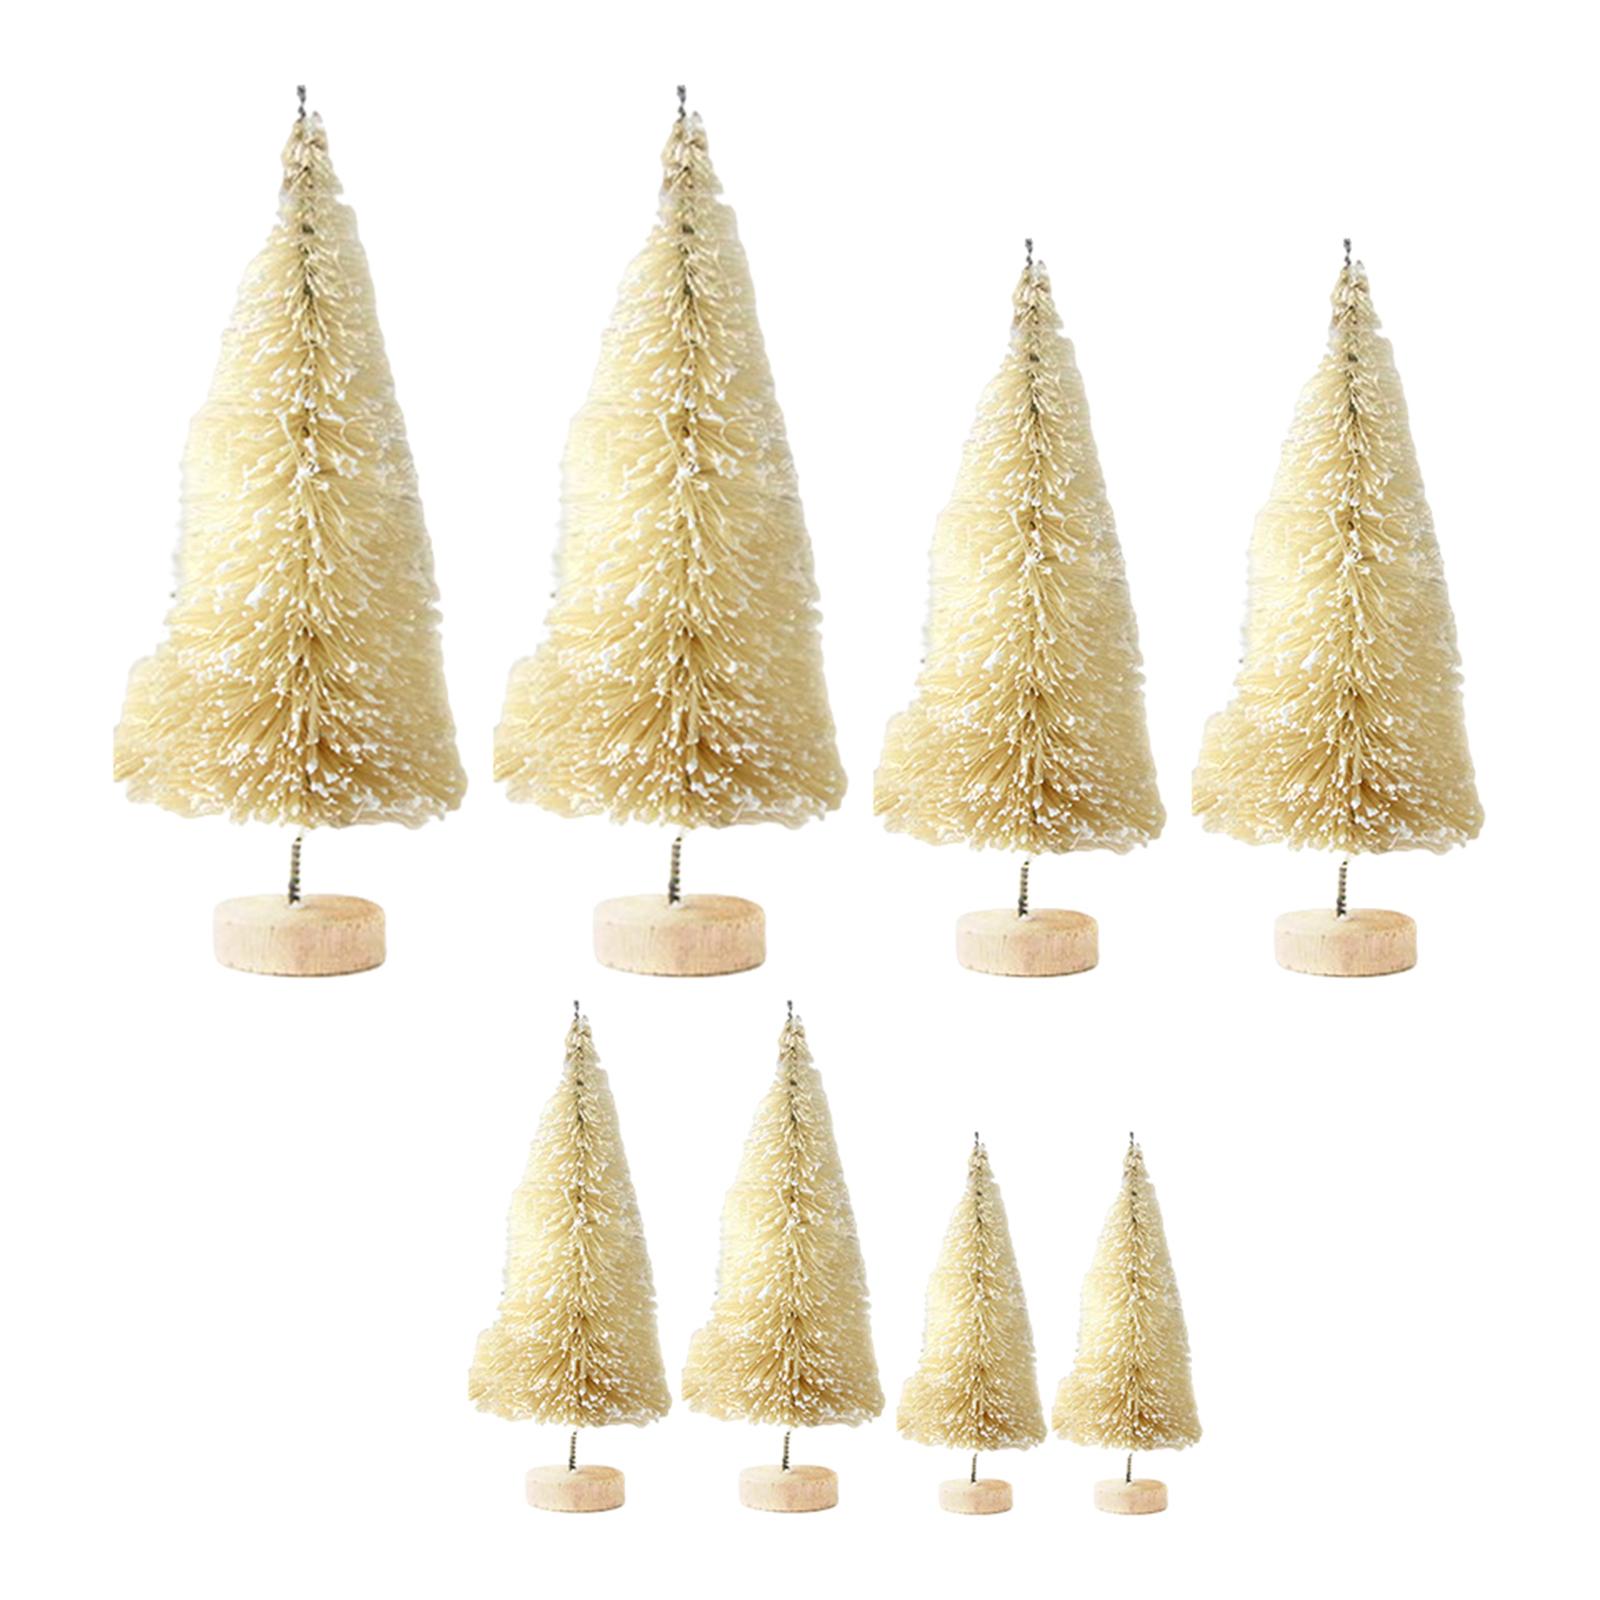 8x Desktop Miniature Pine Tree Ornaments for Desk Christmas Party Holiday Beige